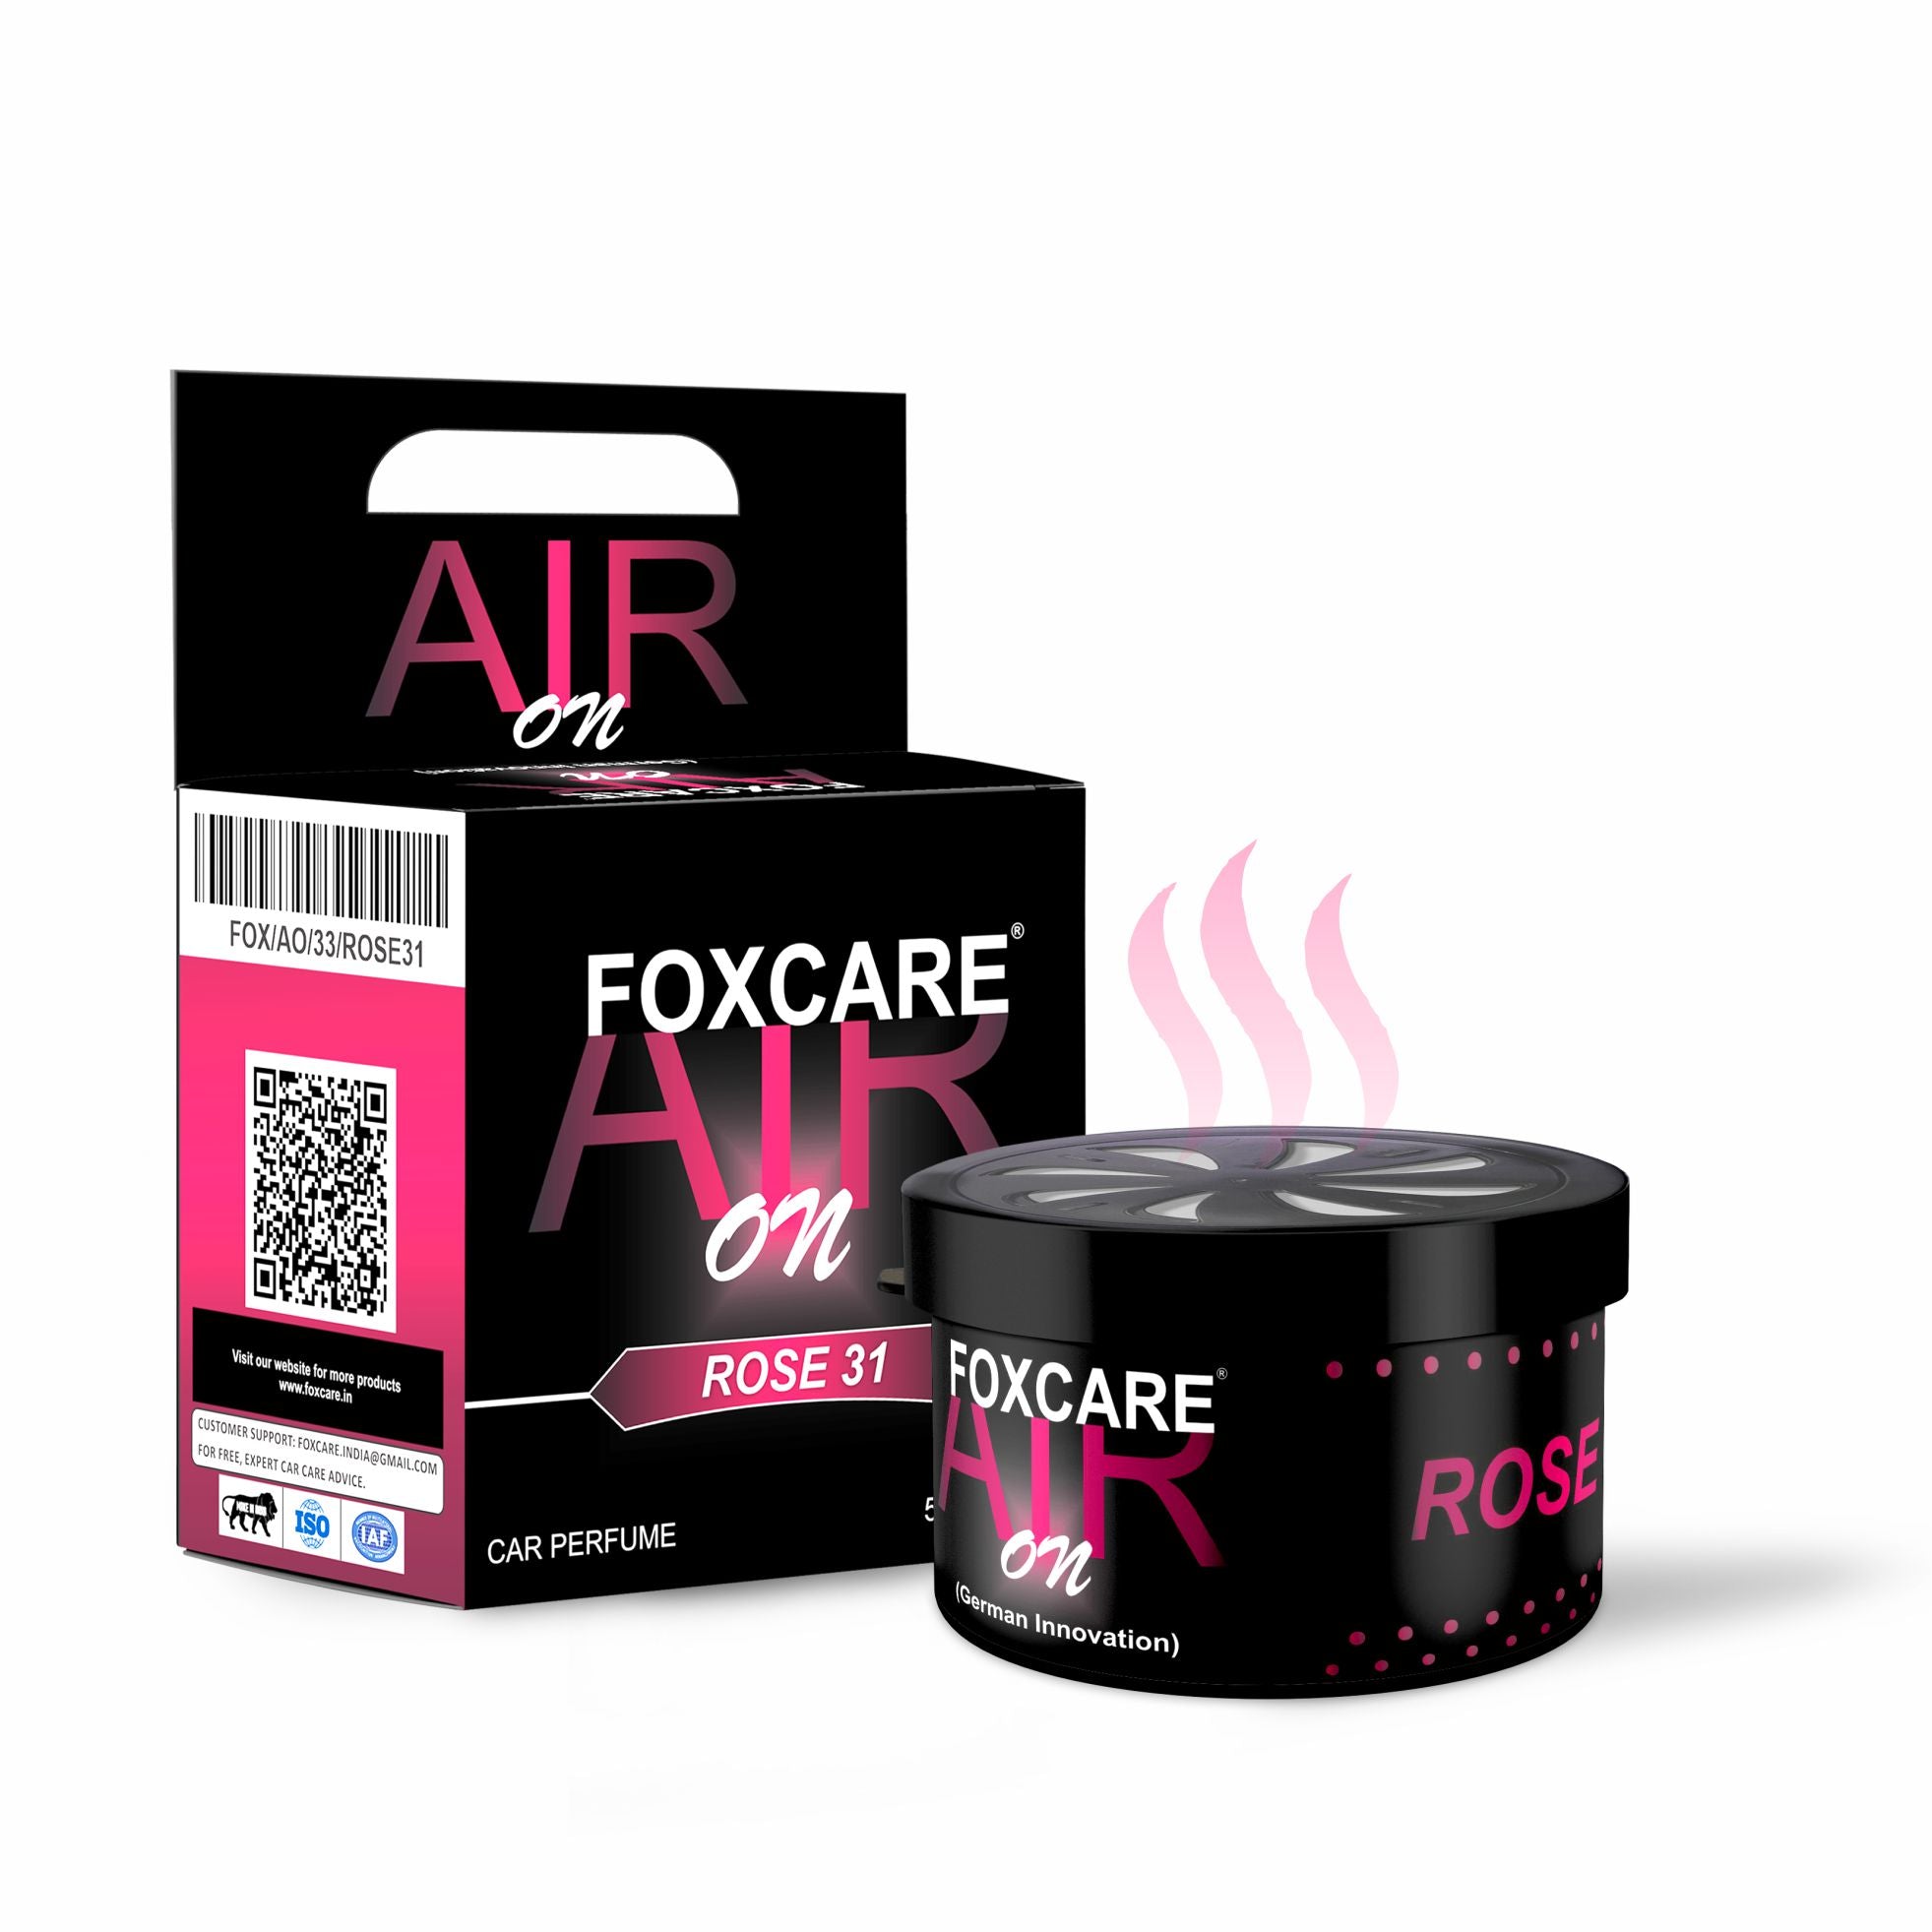 Foxcare Air On Rose 31 Organic Car Perfume Bar, Foxcare Air On Strong Fiber Air Freshener to Freshen'up Your Car | 50 g Car Accessories interior car perfumes and fresheners With German Innovation.